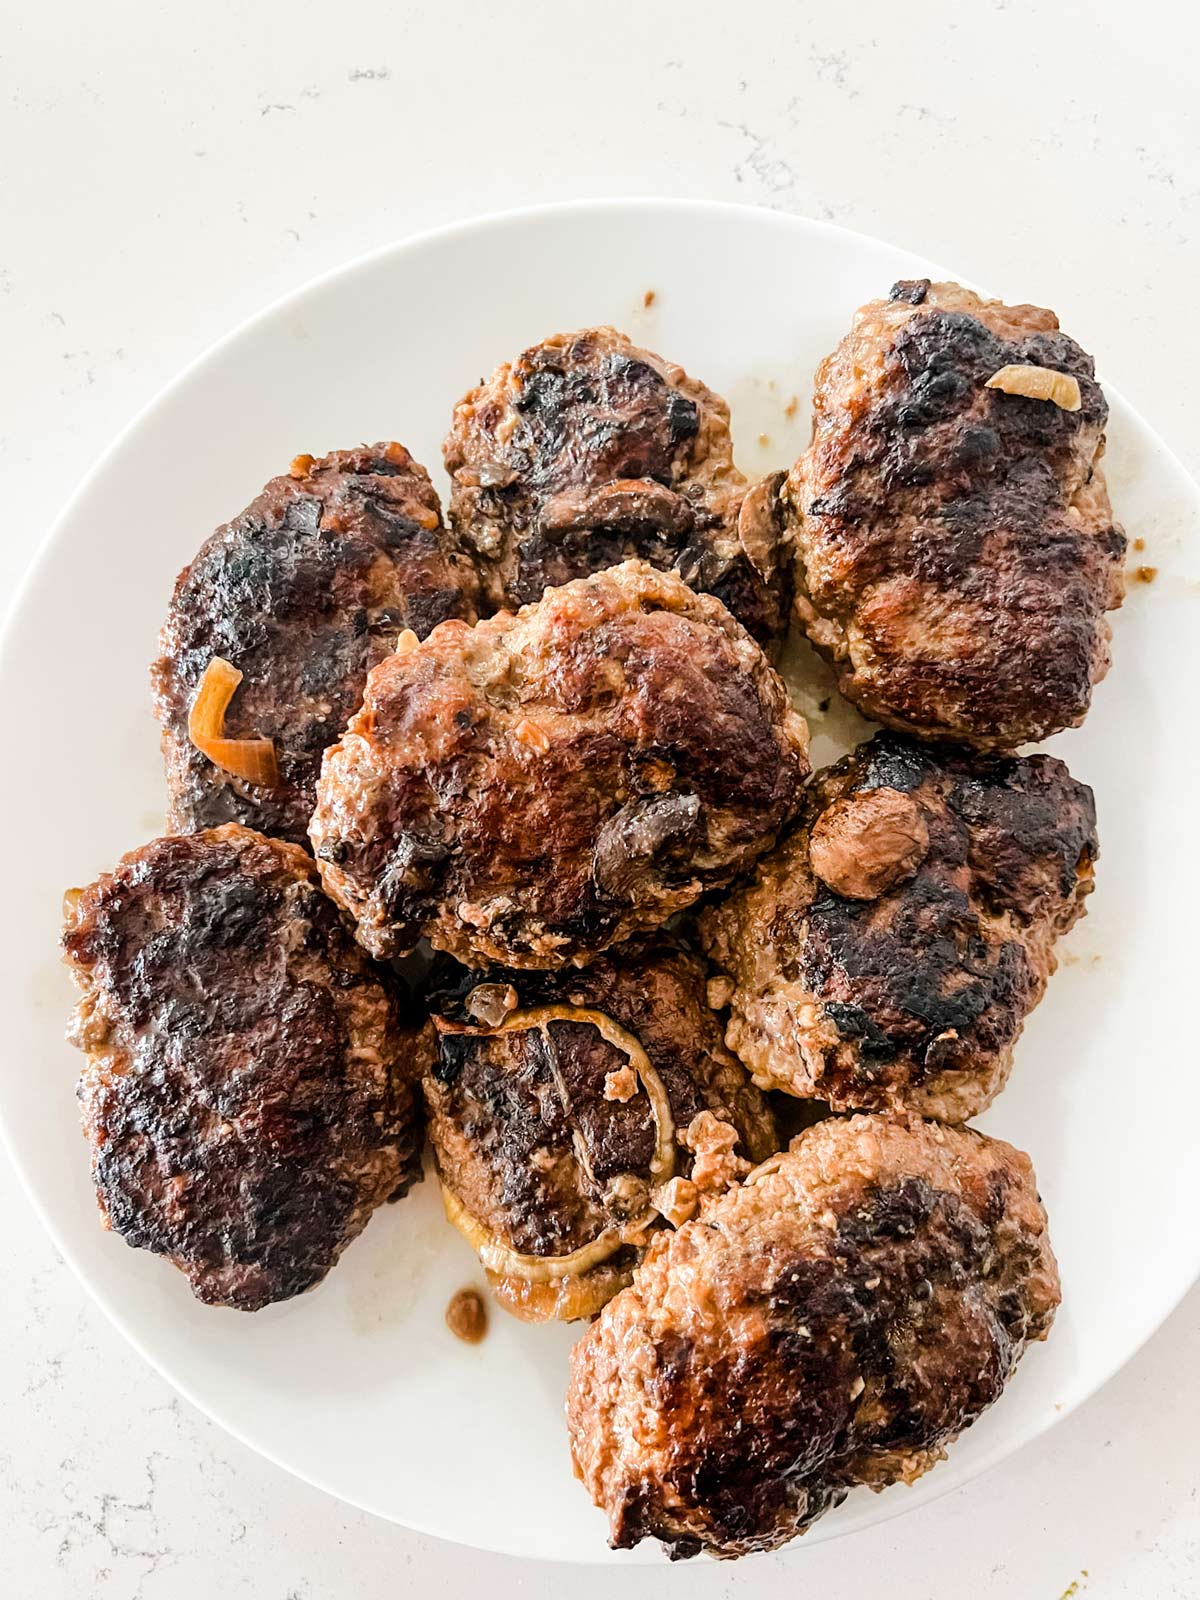 Seared and then slow cooked salisbury steak patties.